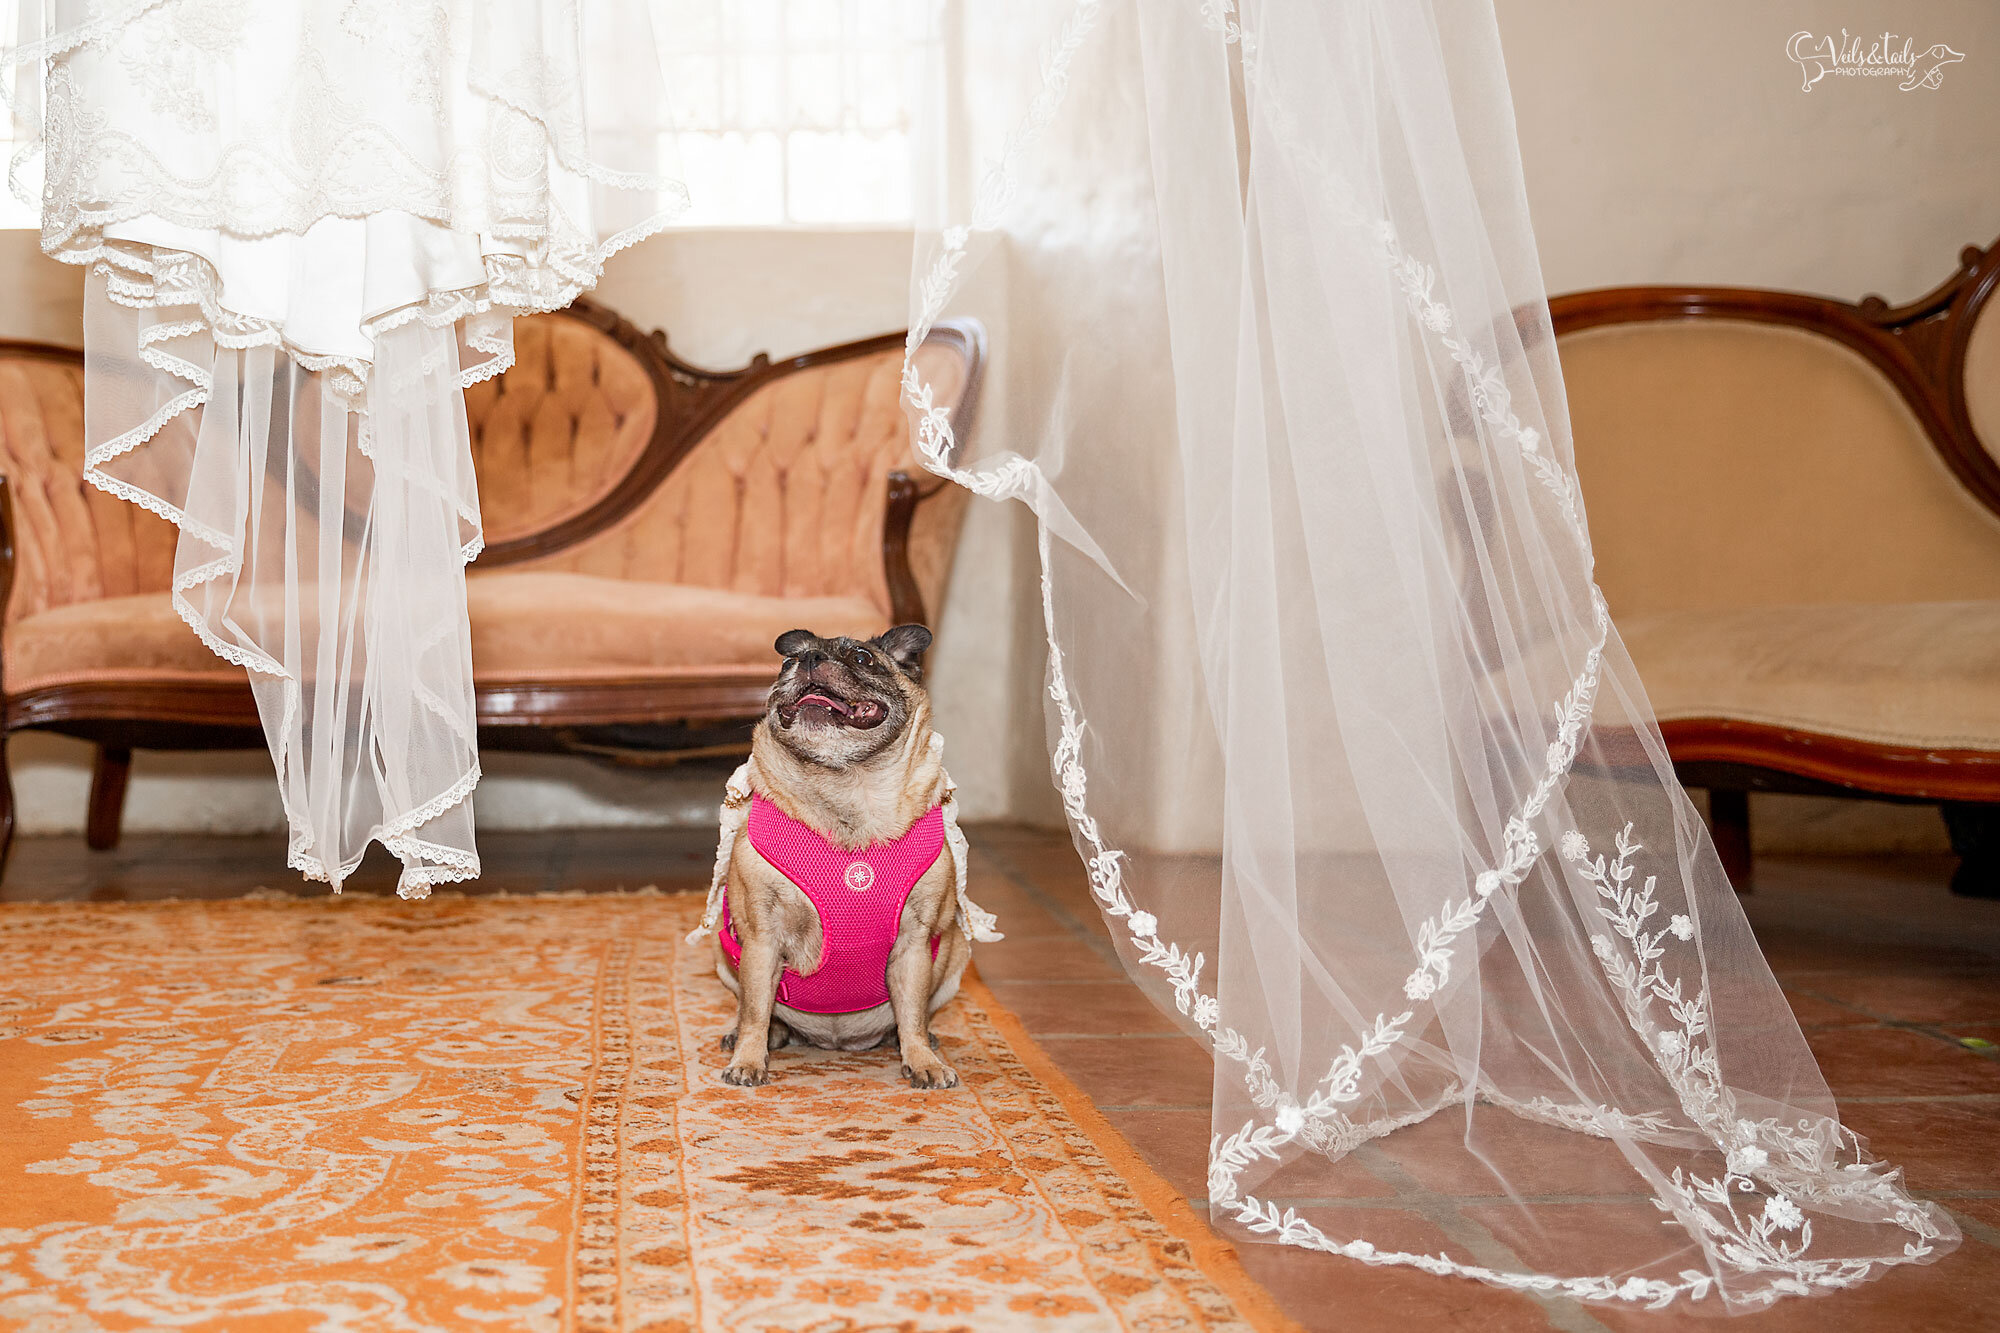 Santa Barbara wedding details, dog helps getting ready with veil. Veils and Tails.